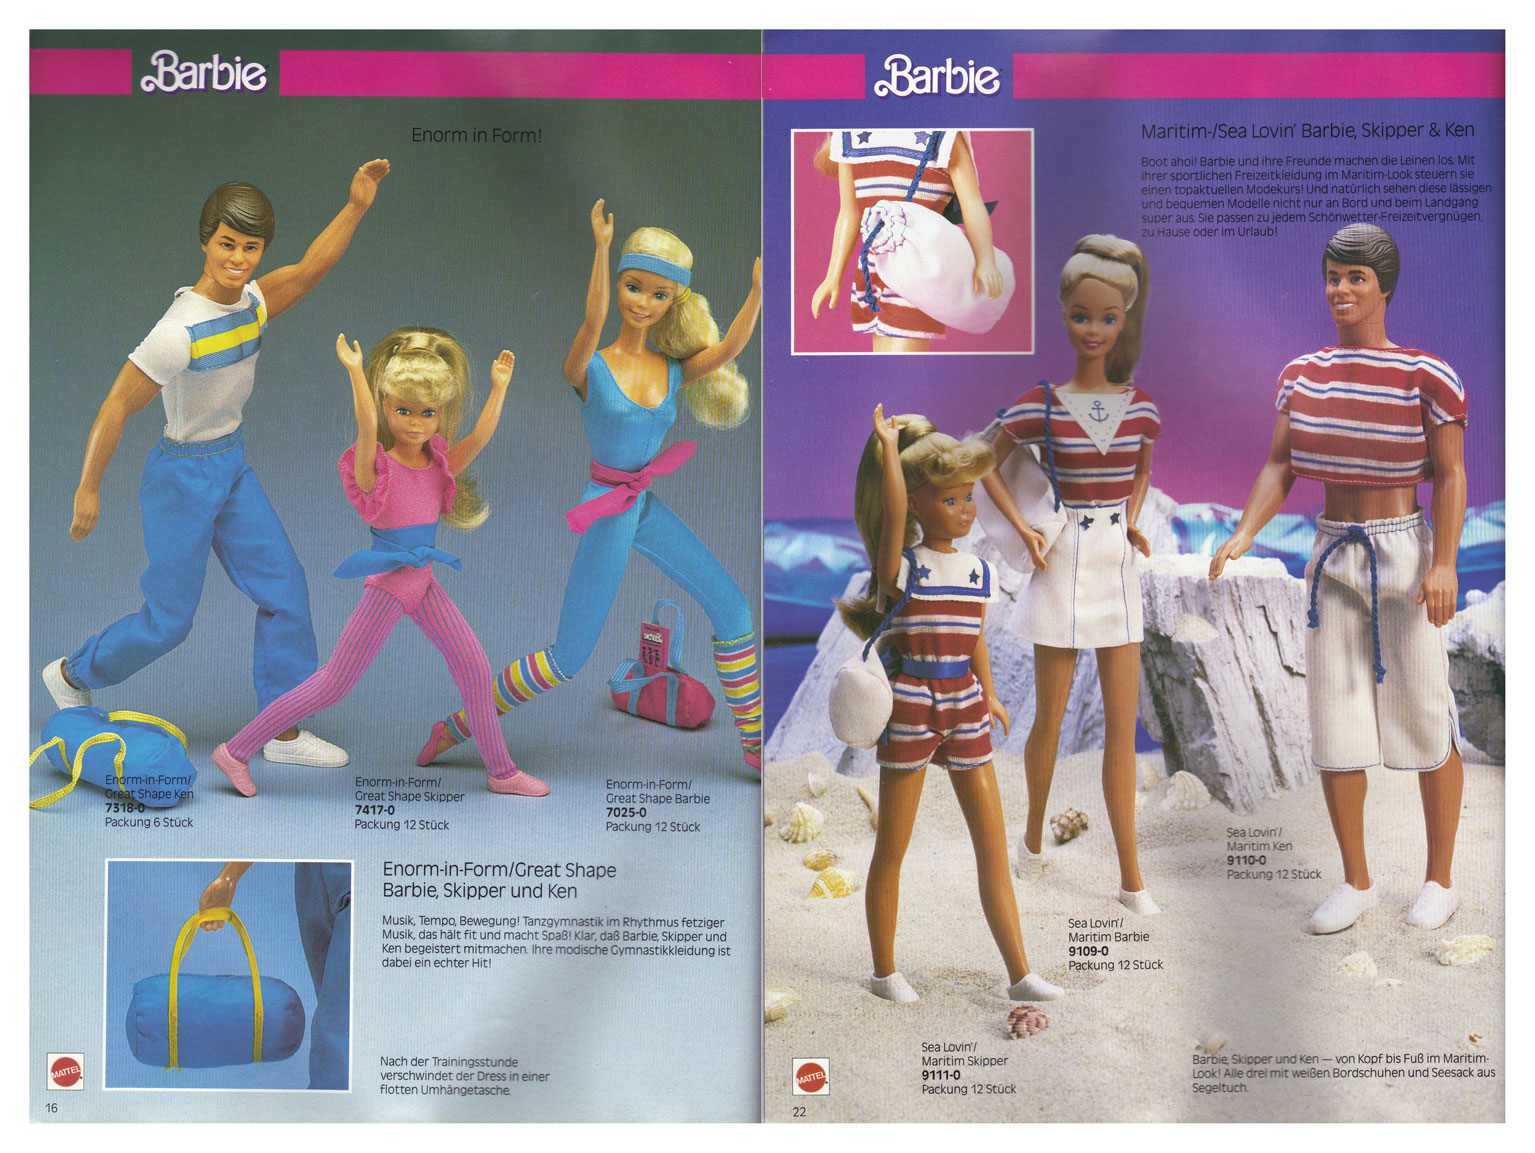 From 1986 German Mattel Toys catalogue